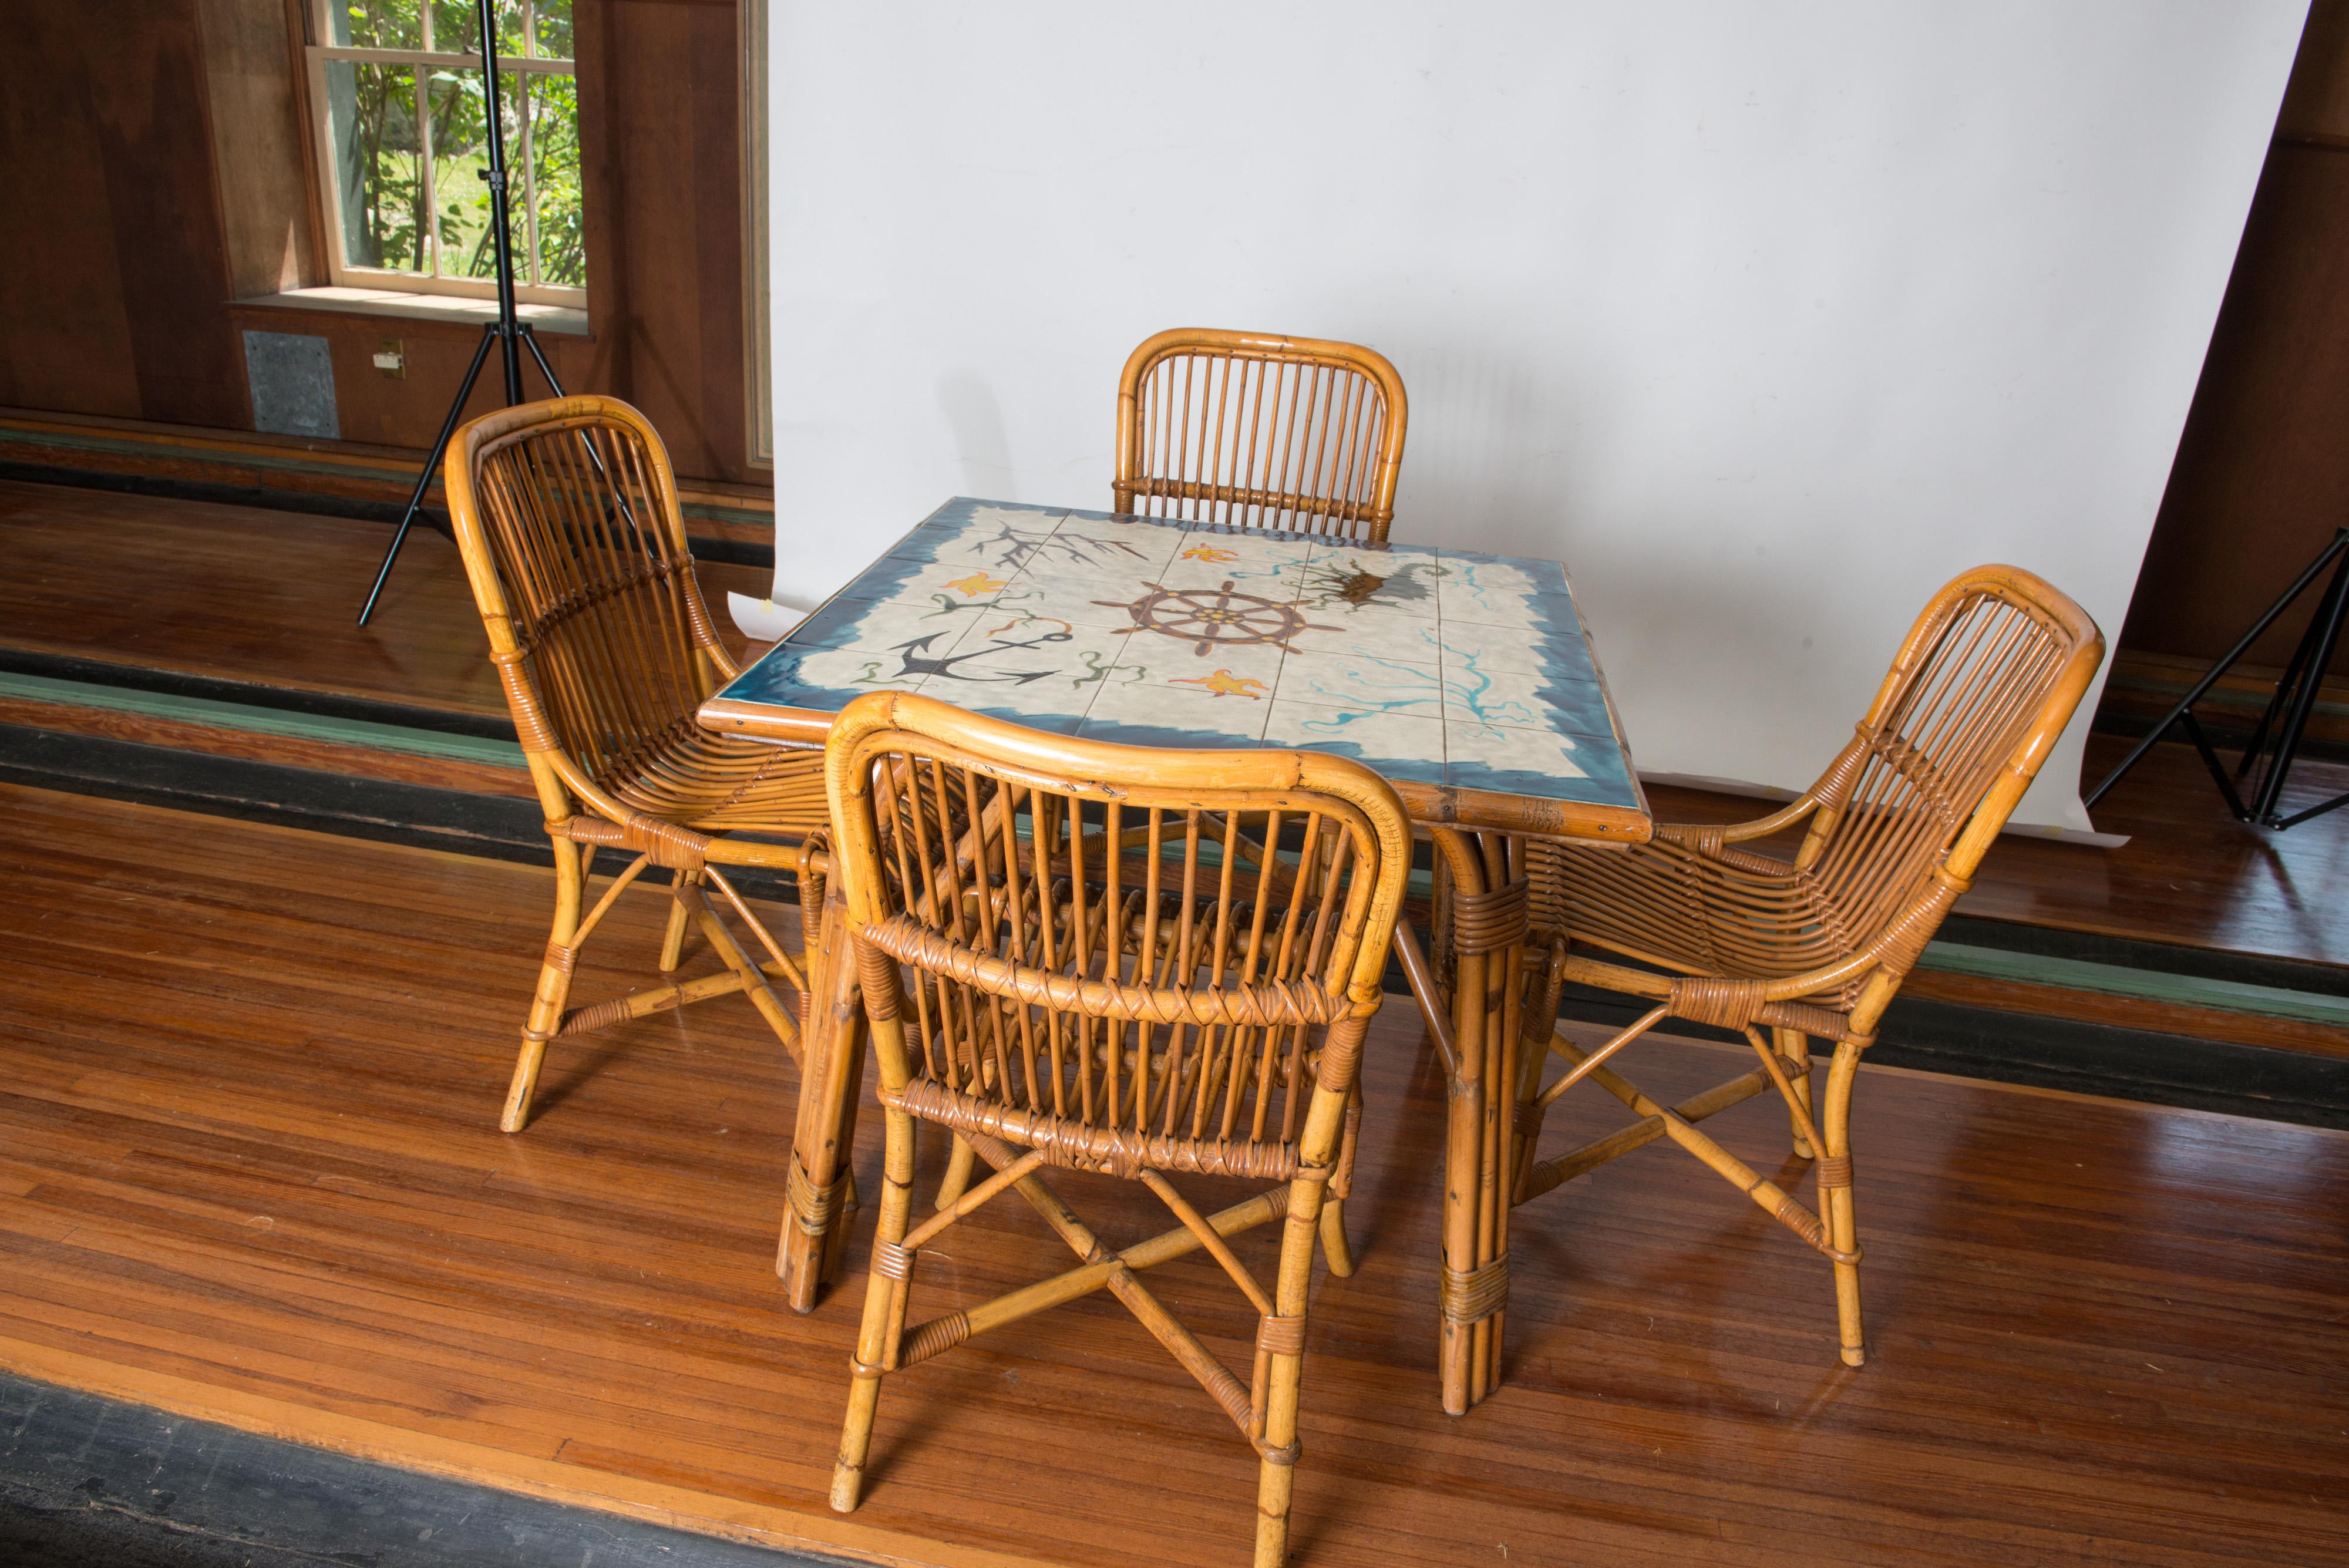 Cote D'Azur Rattan, Tile Table and Chairs  For Sale 1